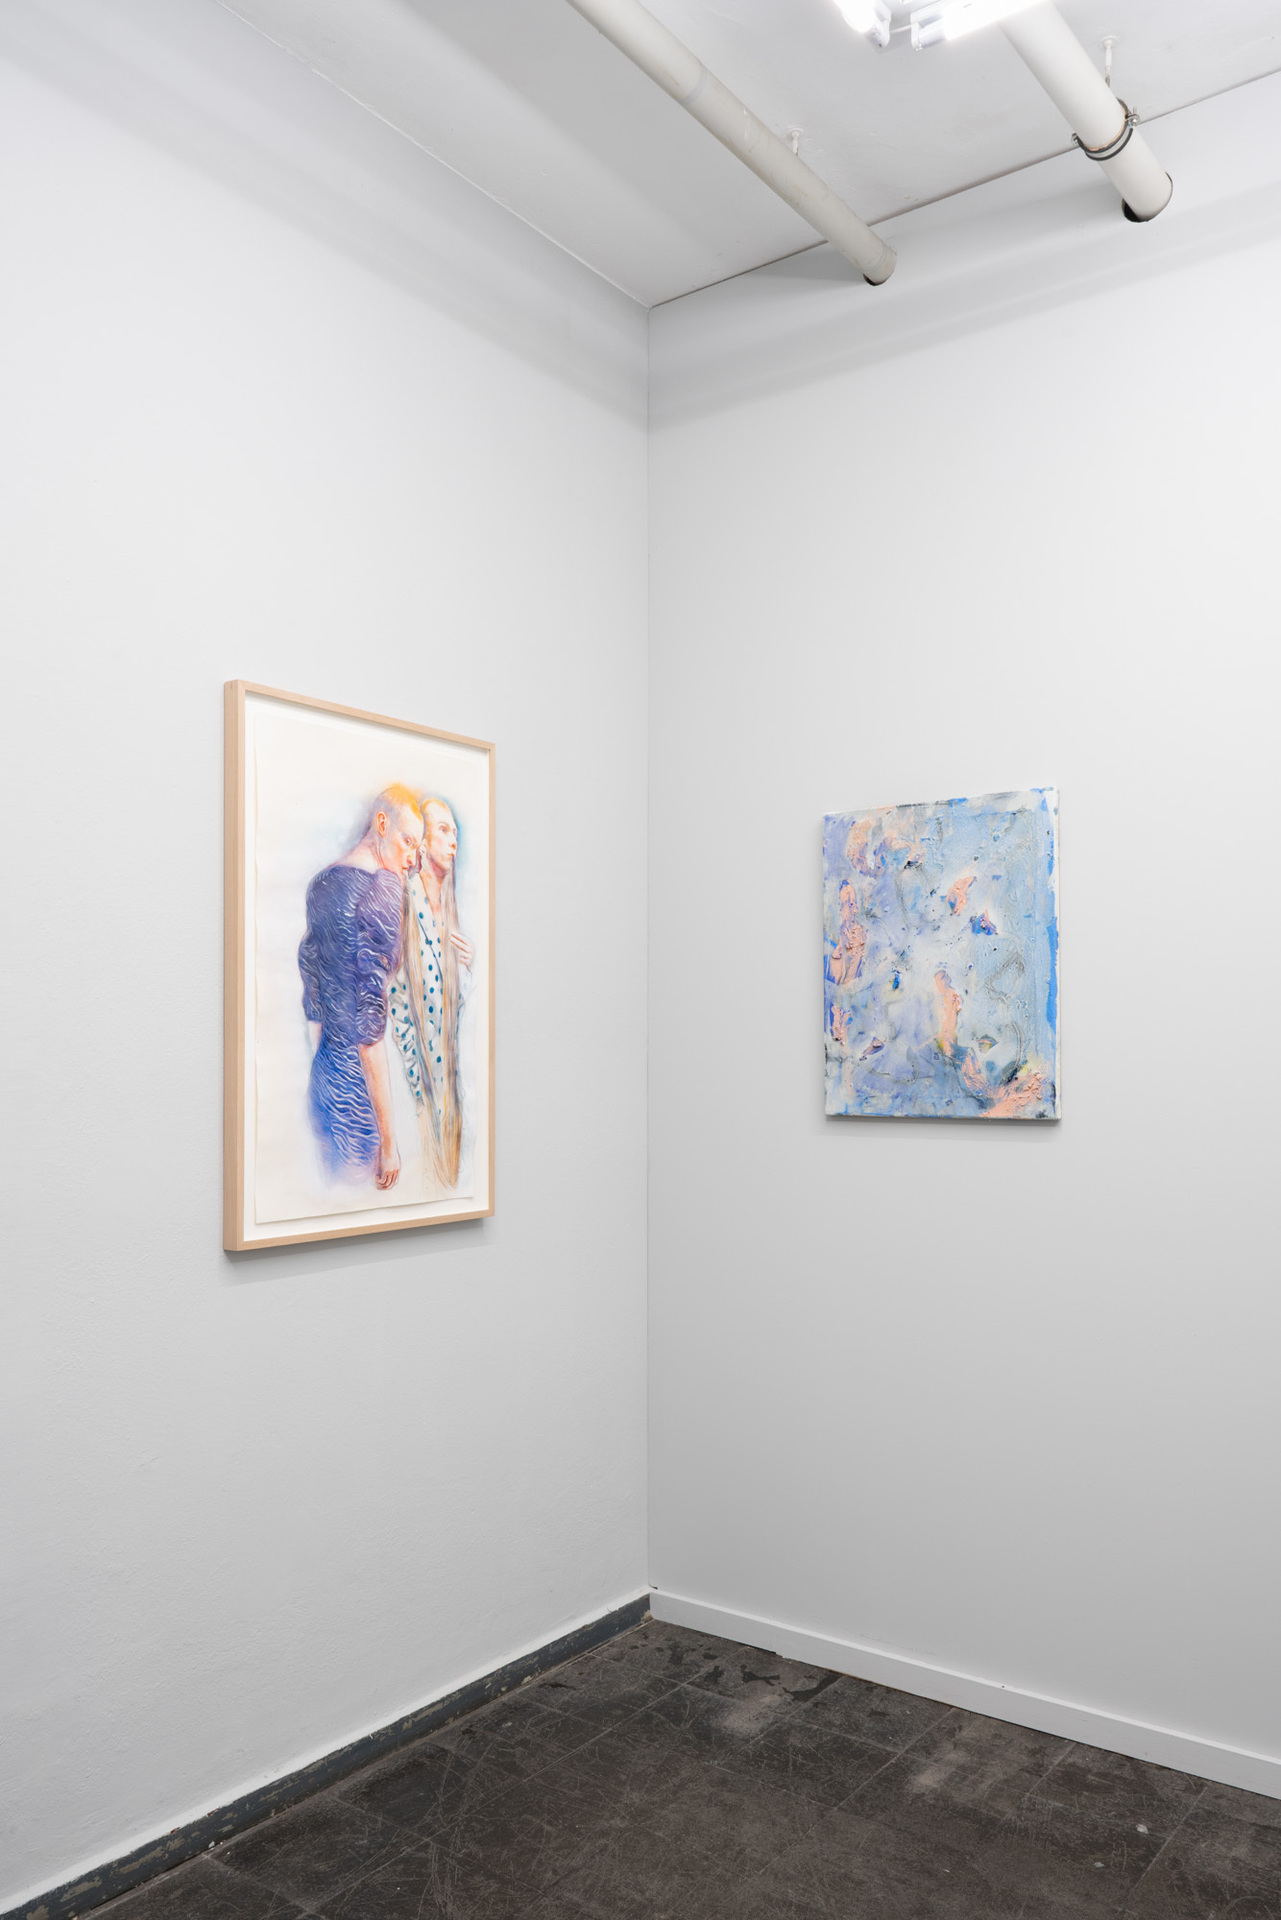 From left to right:   MARIANNA IGNATAKI, Jake & Jason, 2021 Watercolor, gouache, color pigments, graphite and colored pencils on paper 87x55cm  ALANA LAKE, Cum & Gum, 2021 Oil, pigment and epoxy on canvas